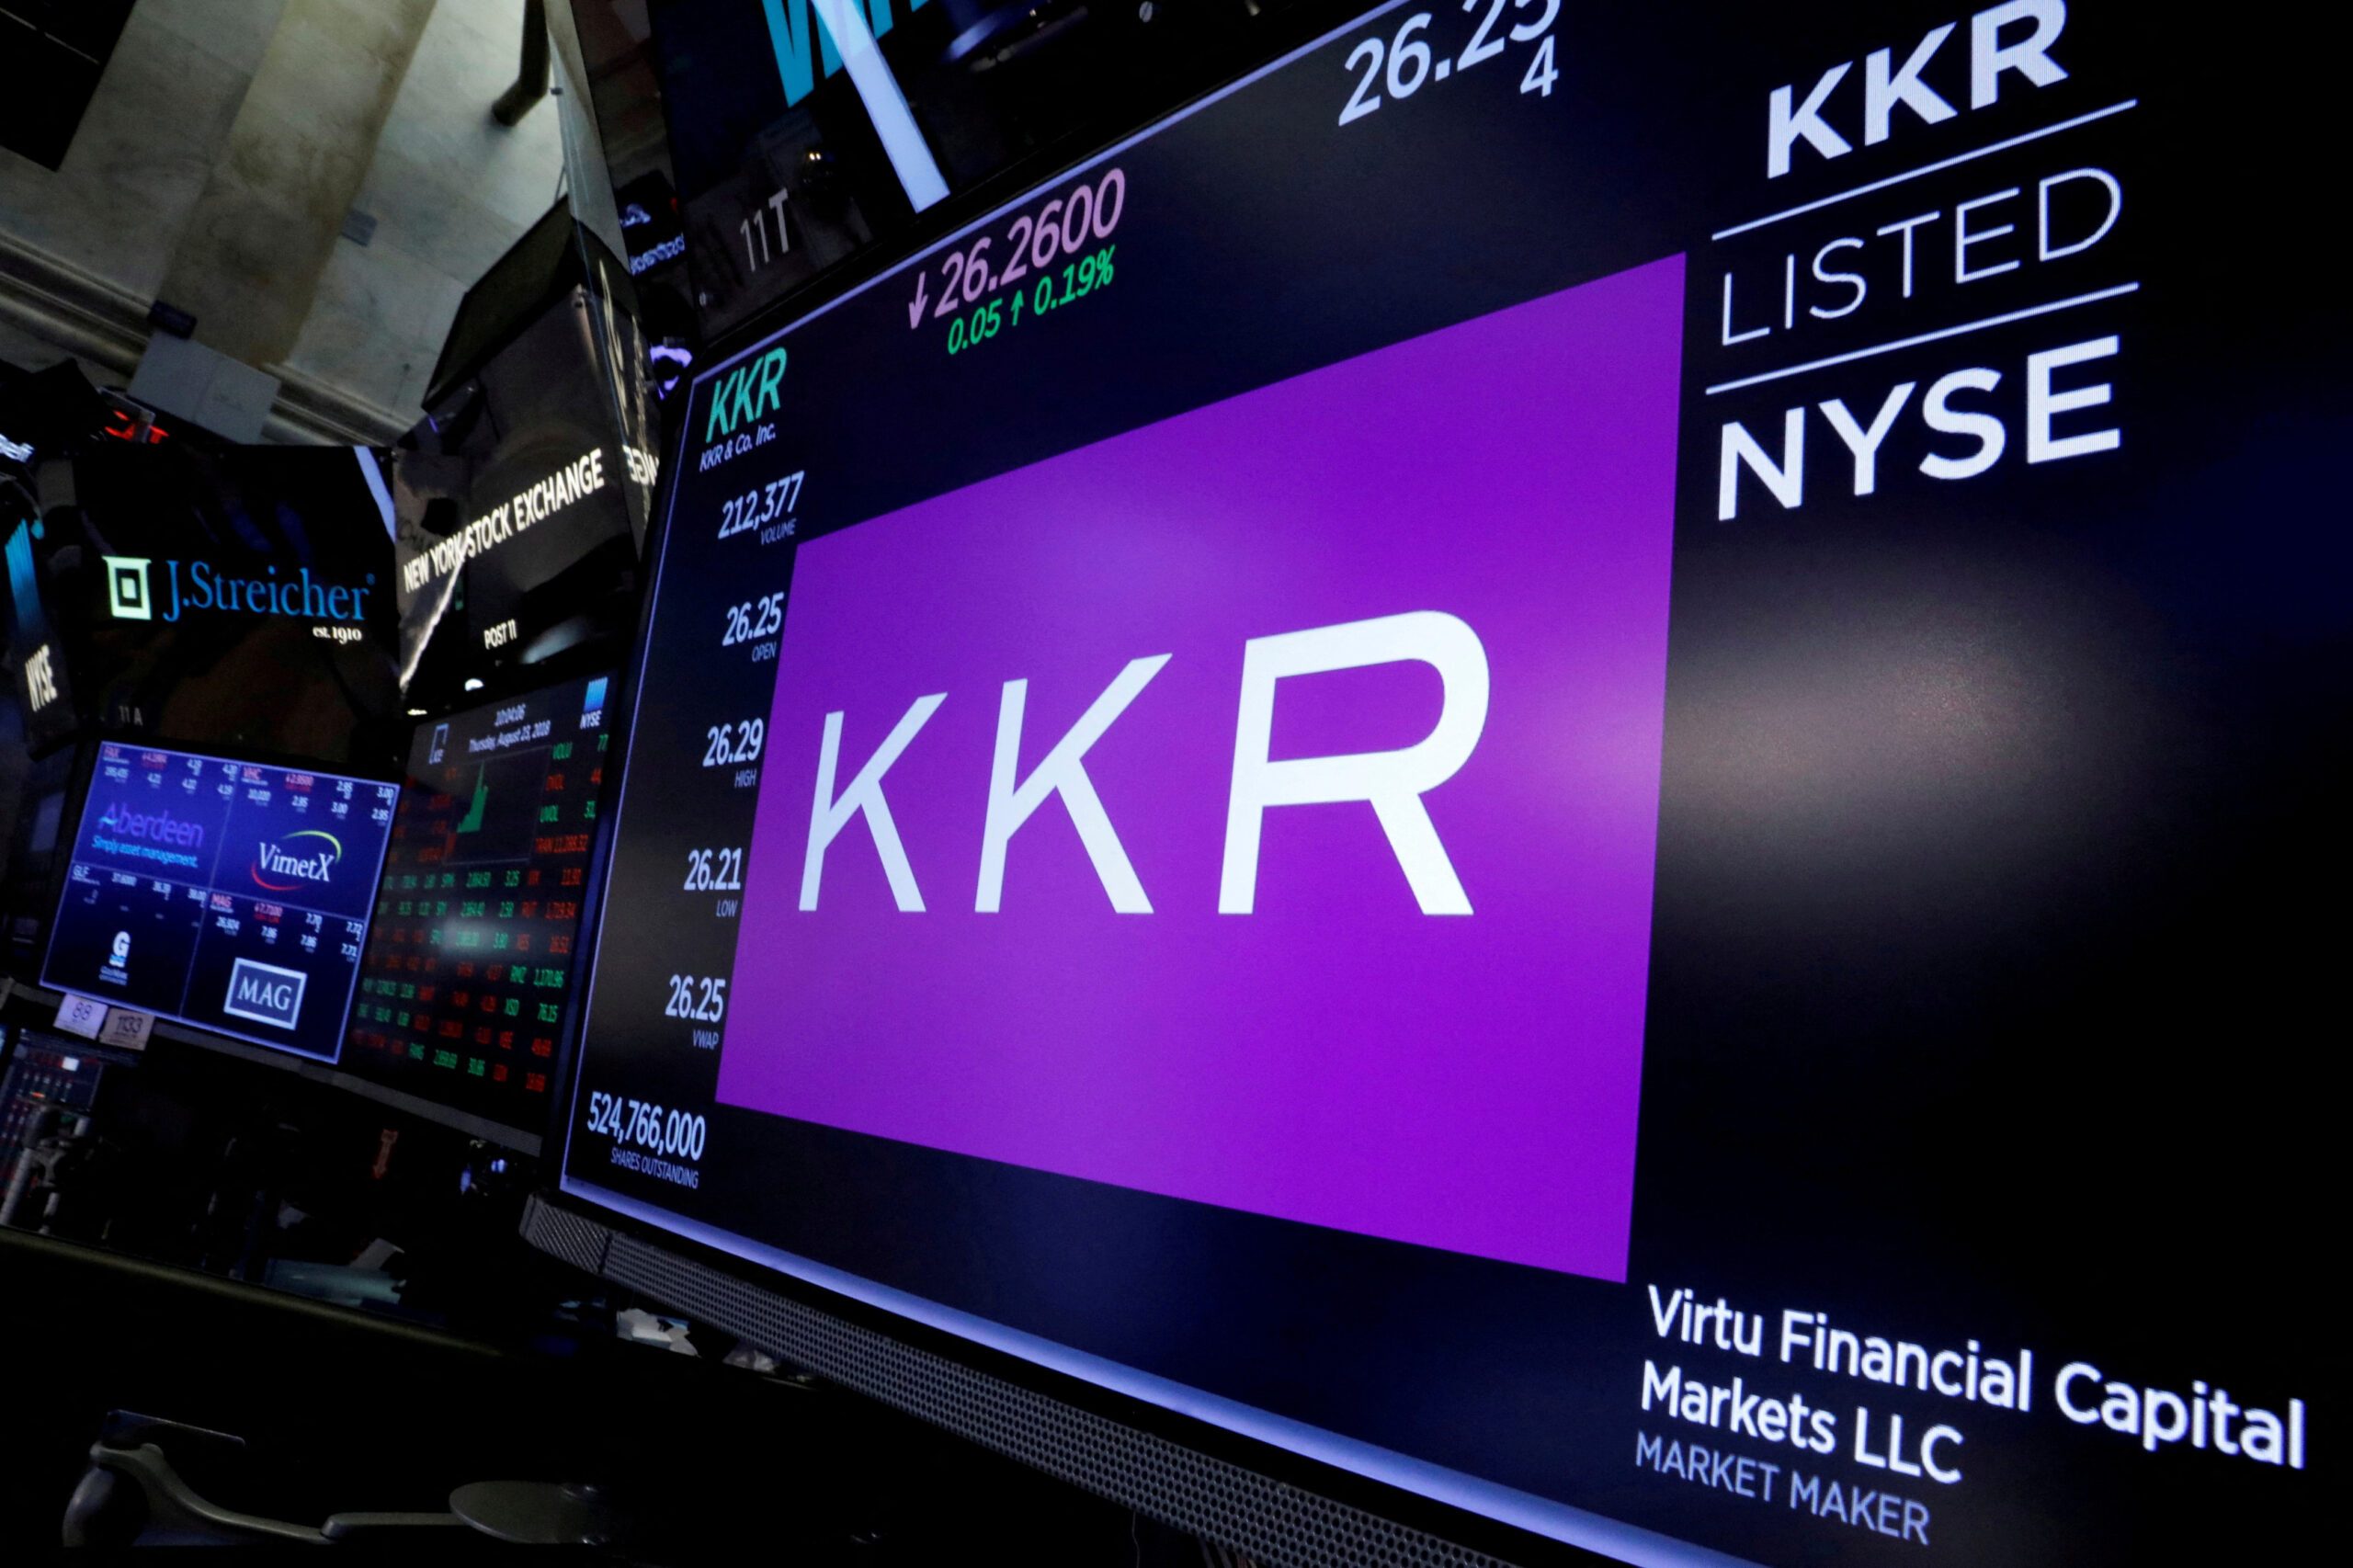 Australia's Perpetual in talks with KKR for sale of corporate trust & wealth management unit